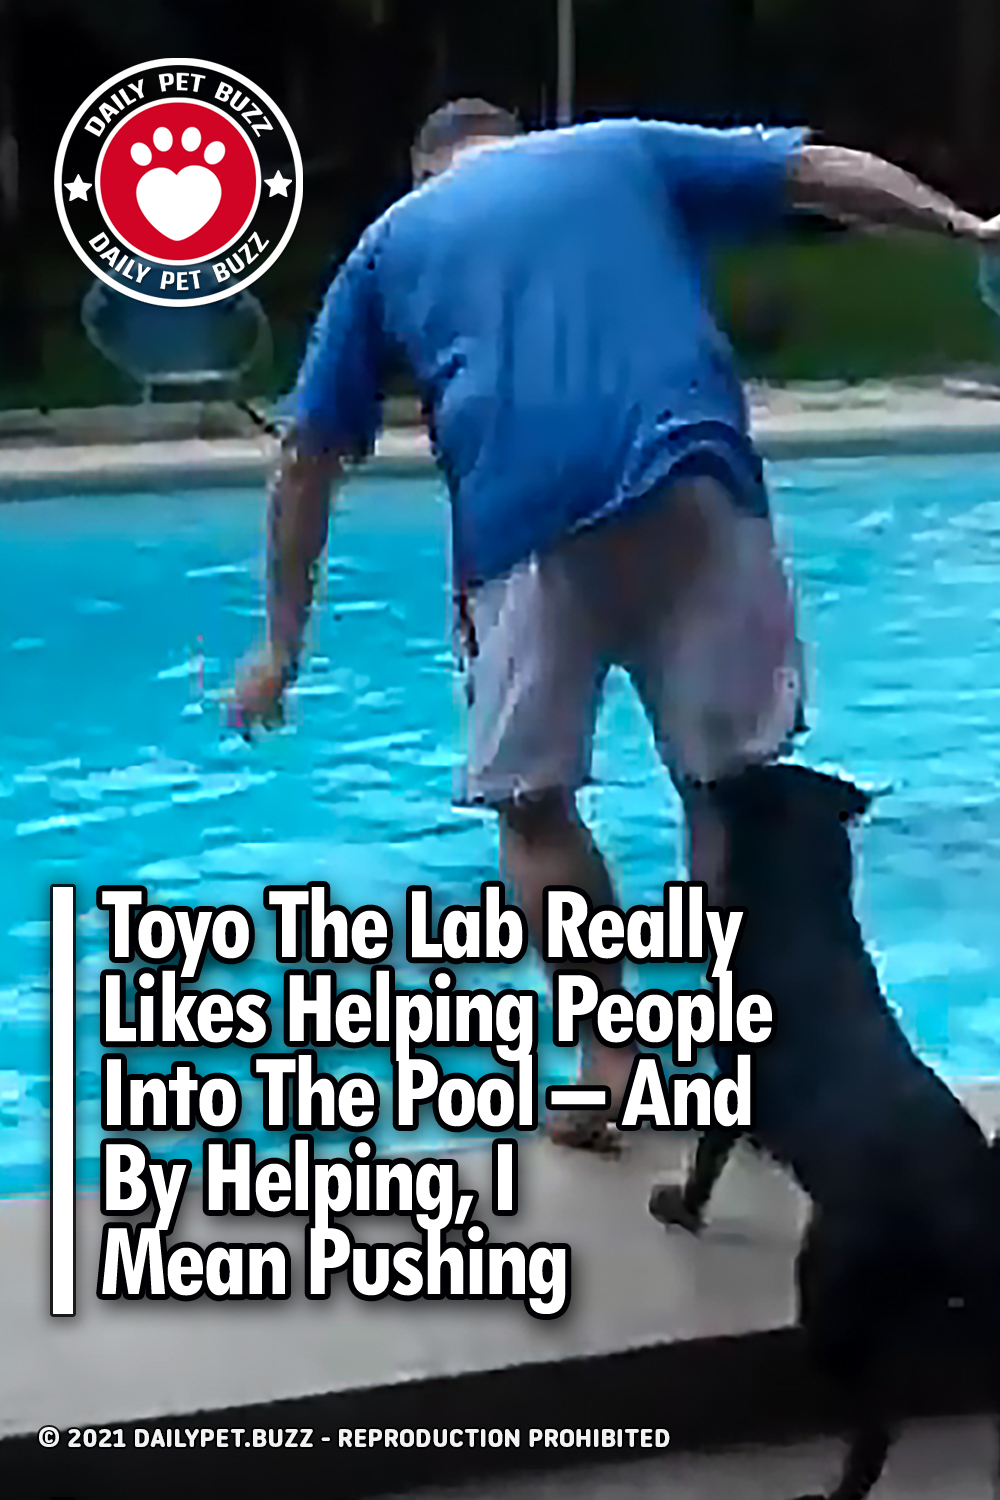 Toyo The Lab Really Likes Helping People Into The Pool – And By Helping, I Mean Pushing